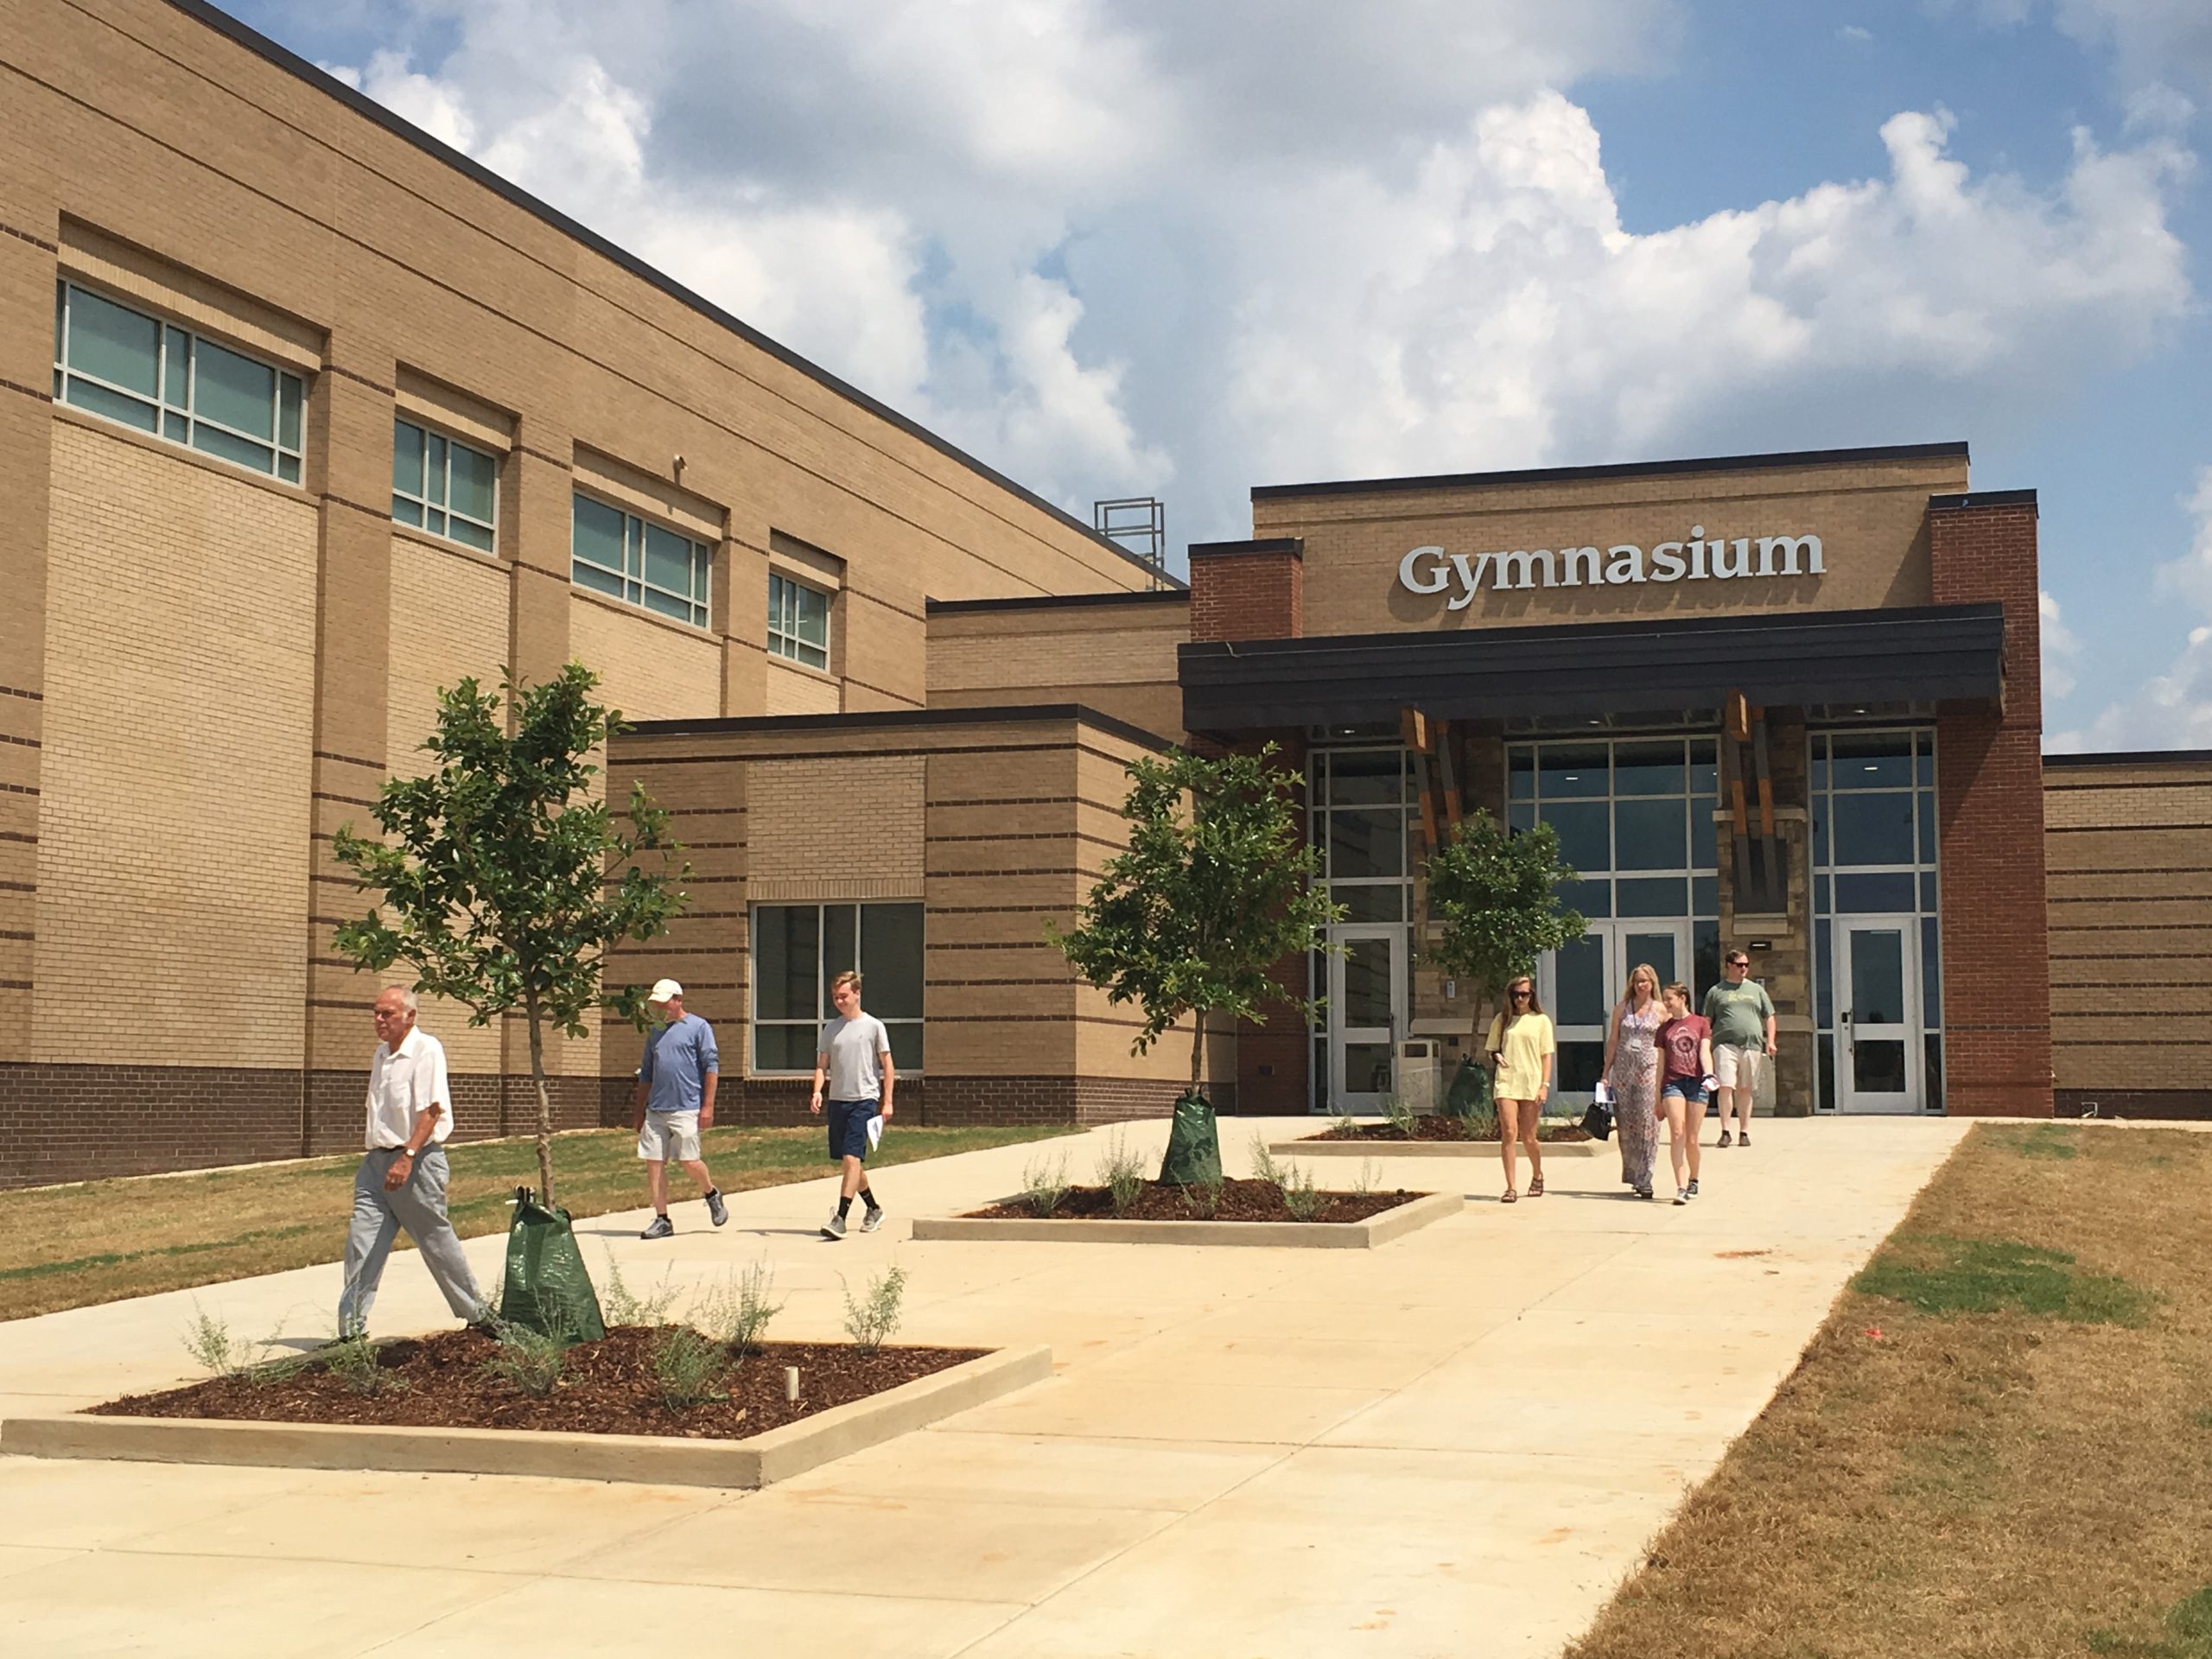 entrance to the gymnasium at grissom high school with people exiting